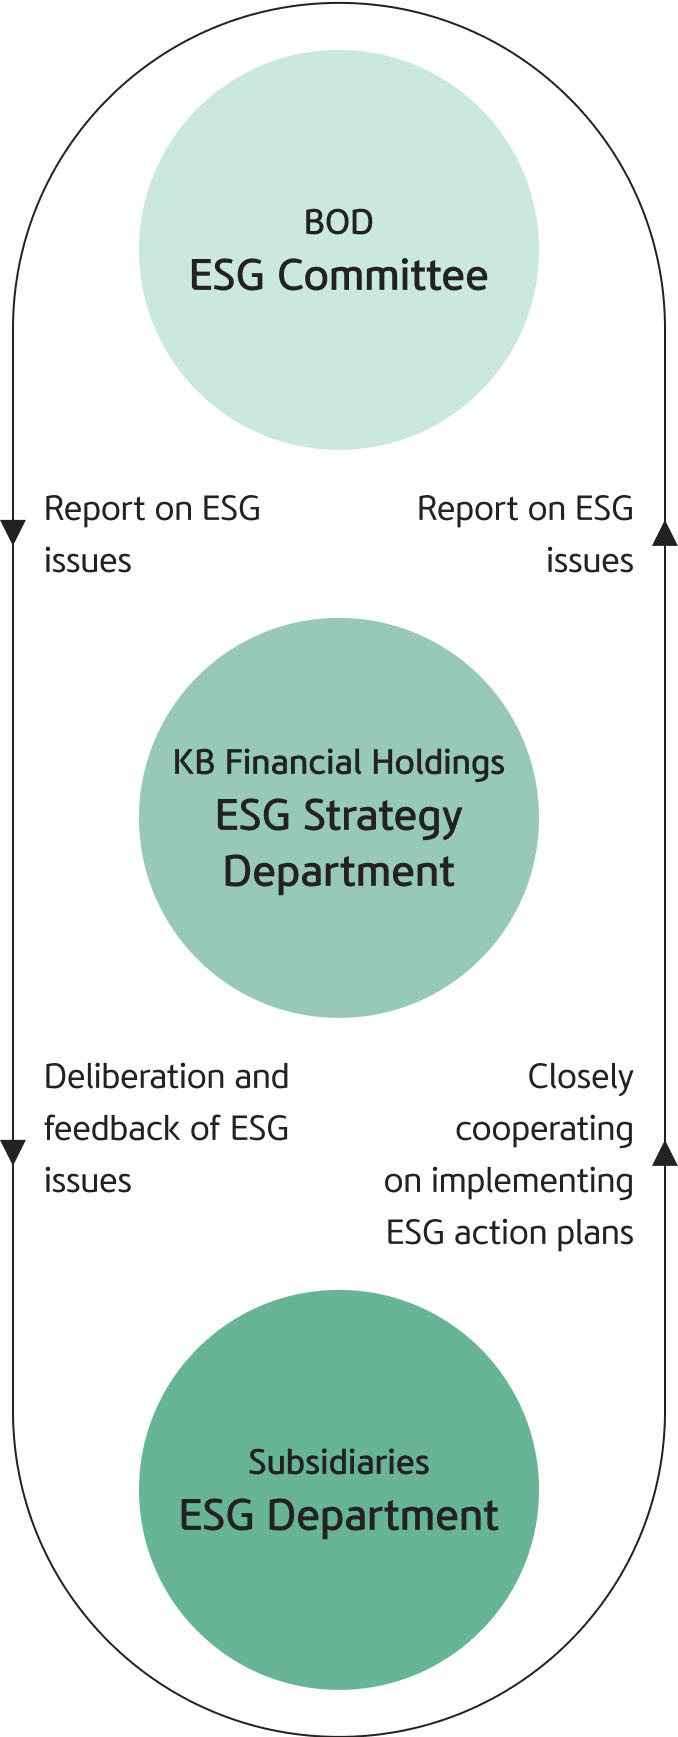 Schematic diagram of KB Financial Group’s ESG governance system consisting of the ESG Committee, ESG Department, and ESG Strategy Department